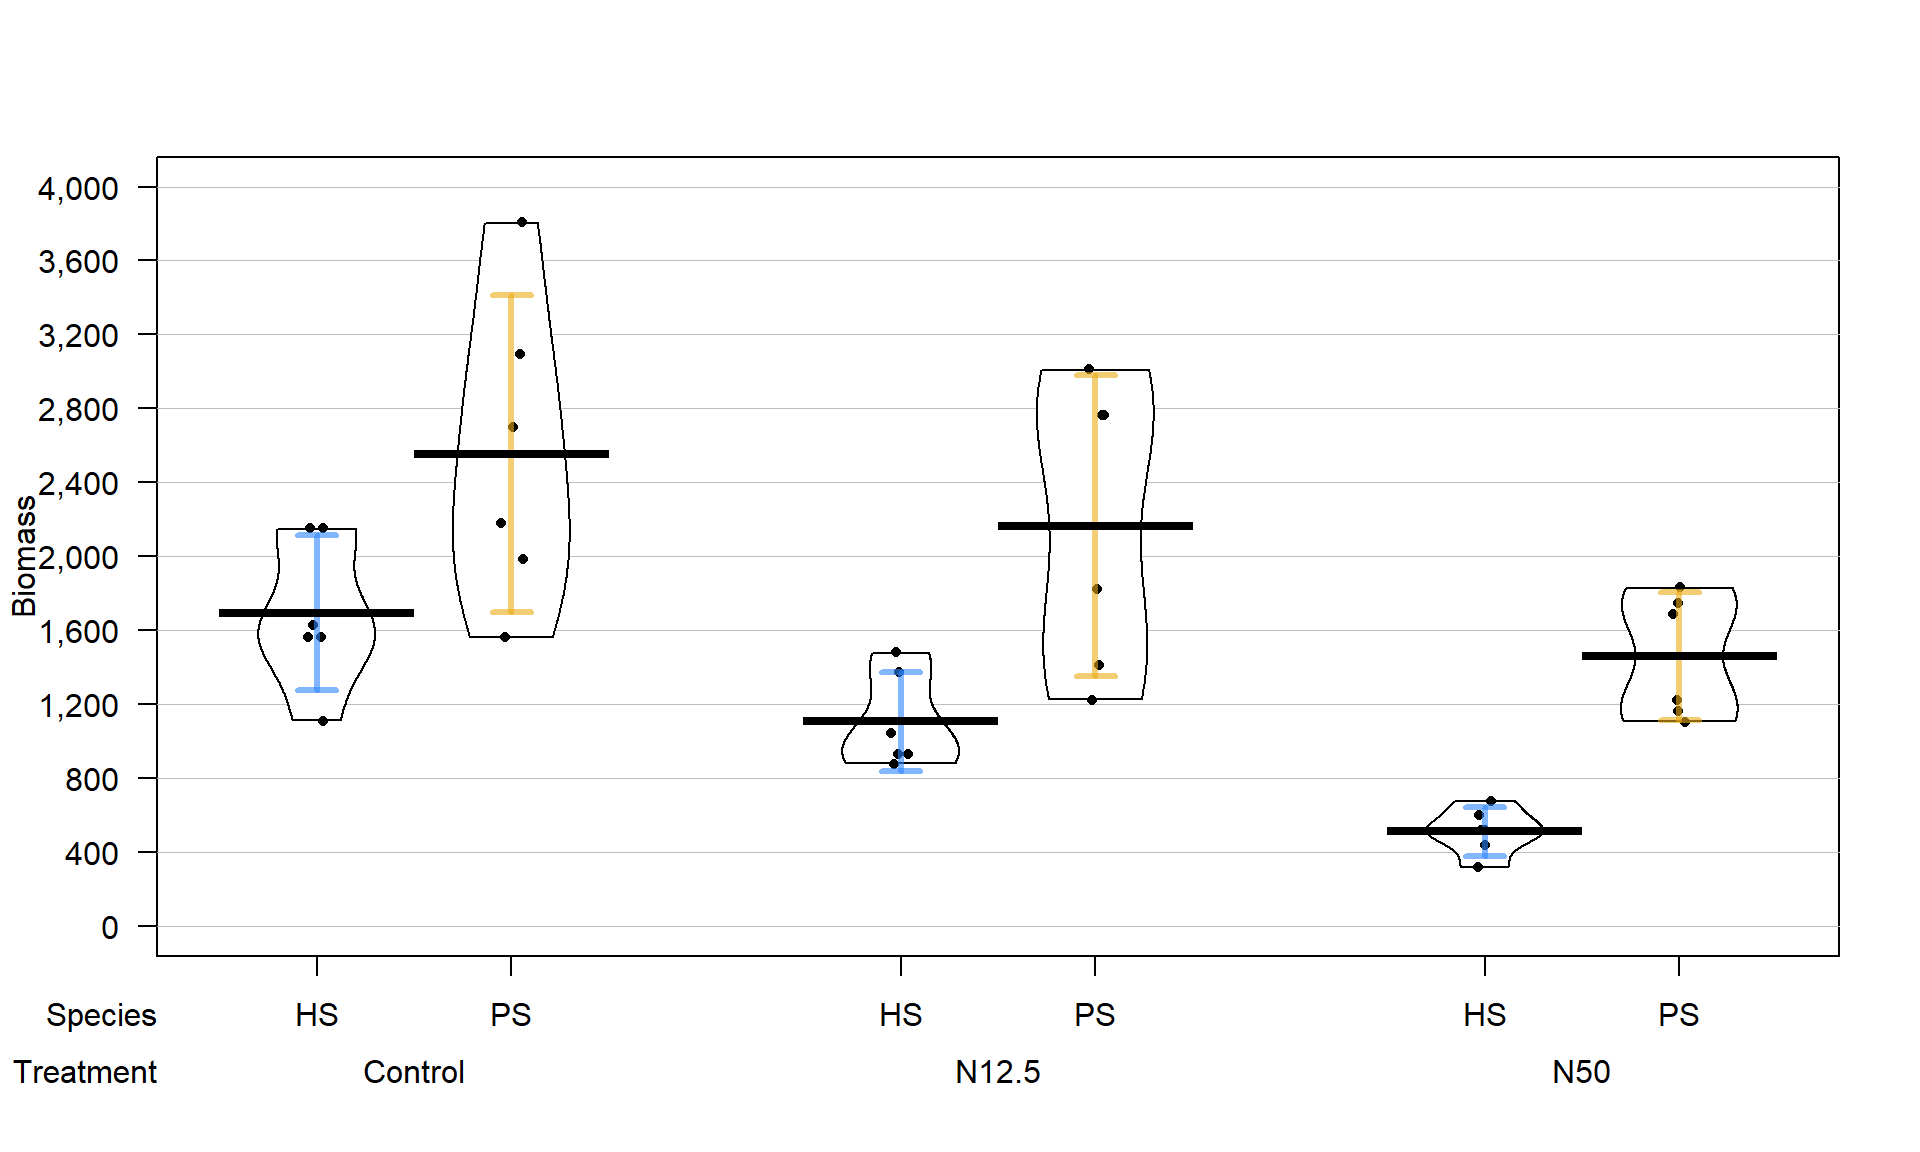 Pirate-plot of biomass responses by treatment and species.